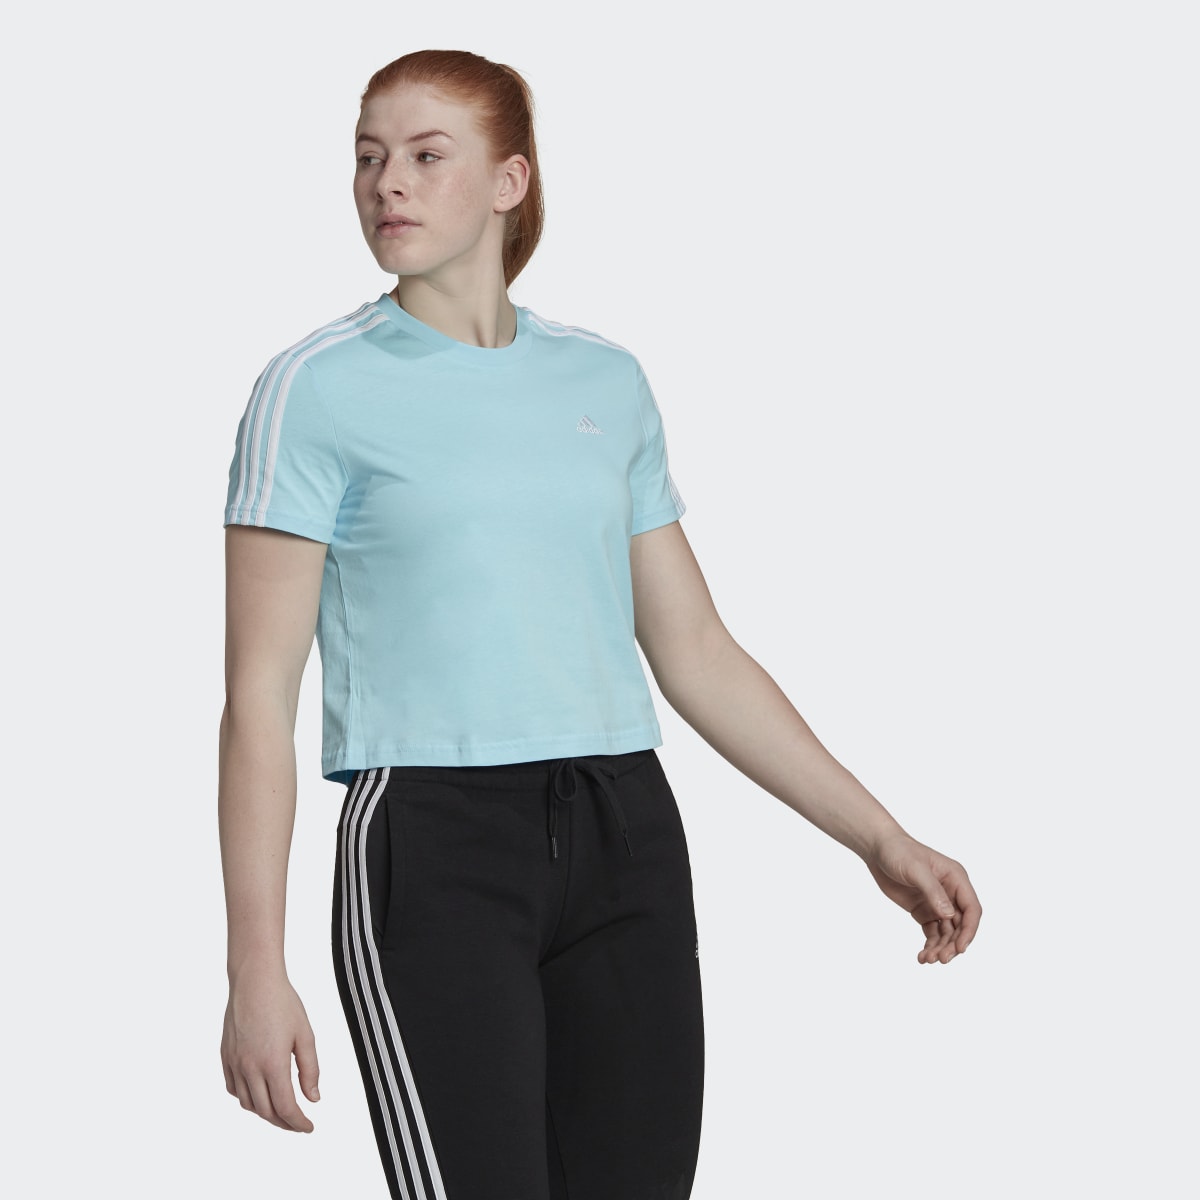 Adidas Essentials Loose 3-Stripes Cropped Tee. 4